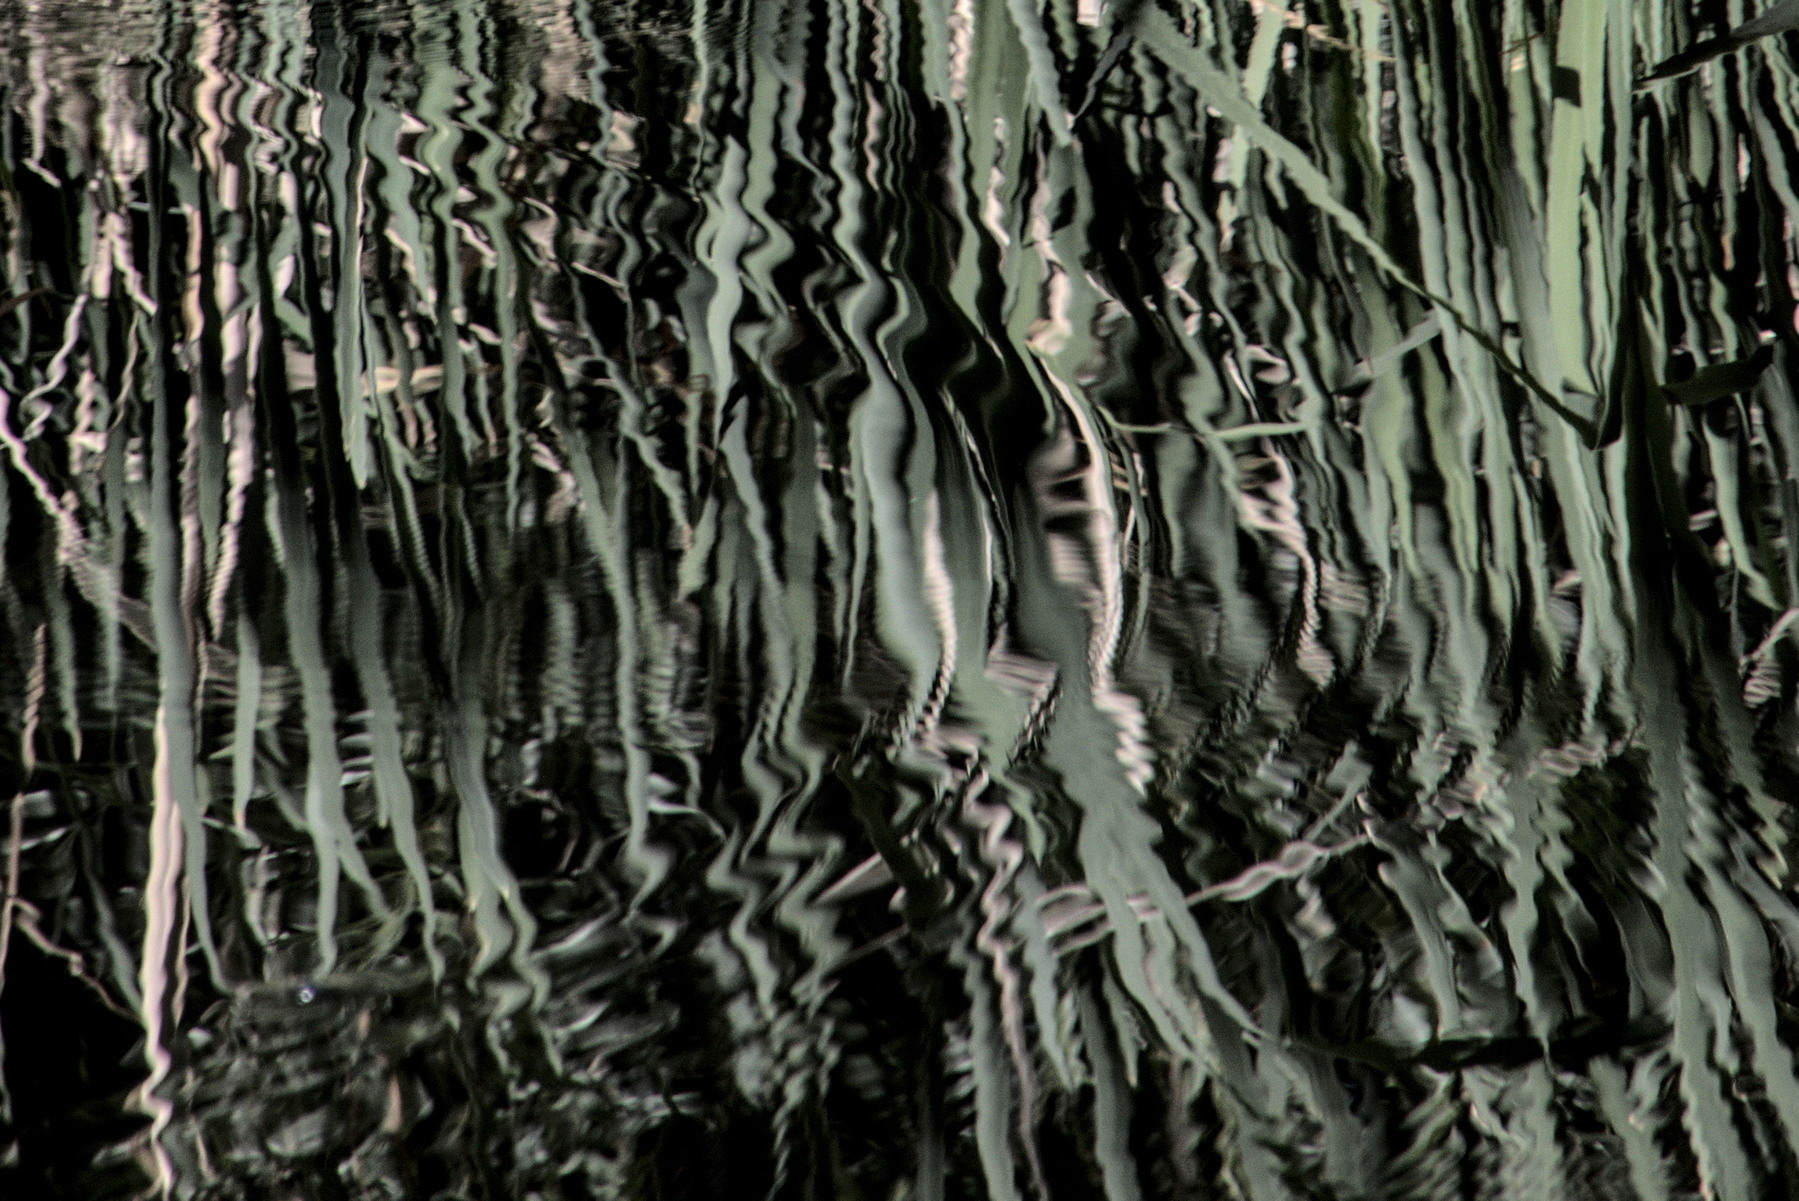 Green reeds reflected in the ripples of a pond.